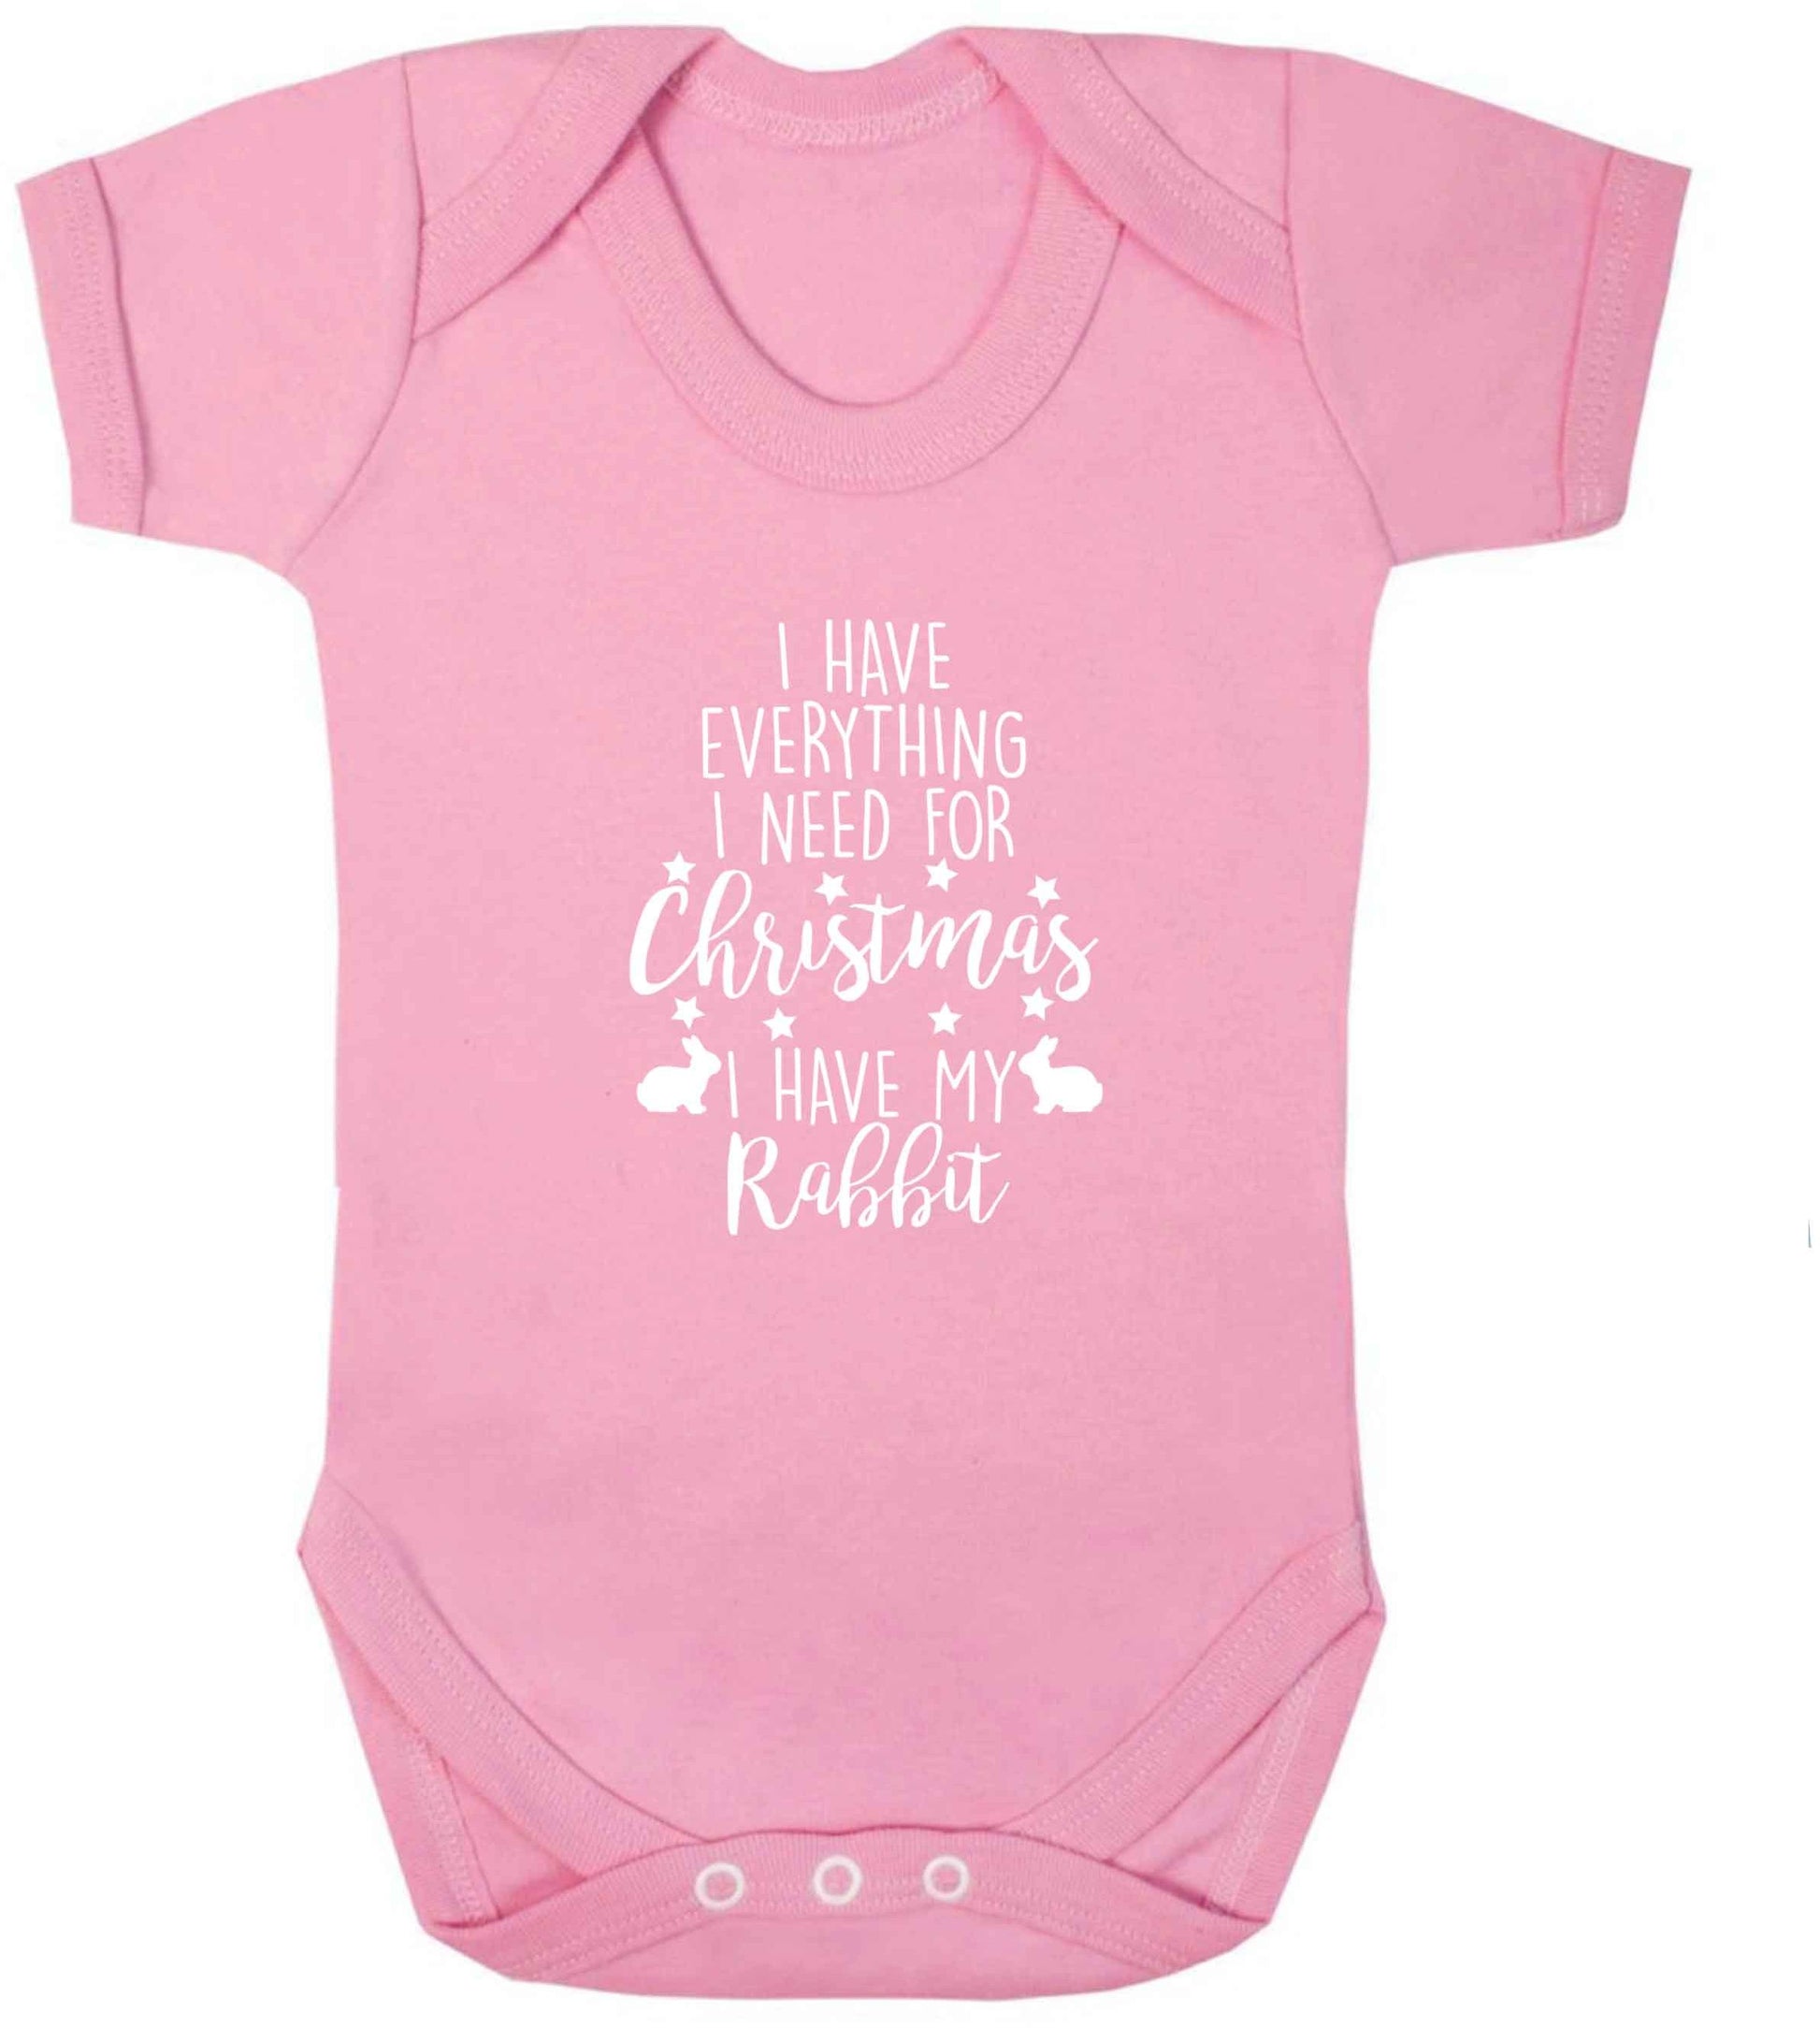 I have everything I need for Christmas I have my rabbit baby vest pale pink 18-24 months